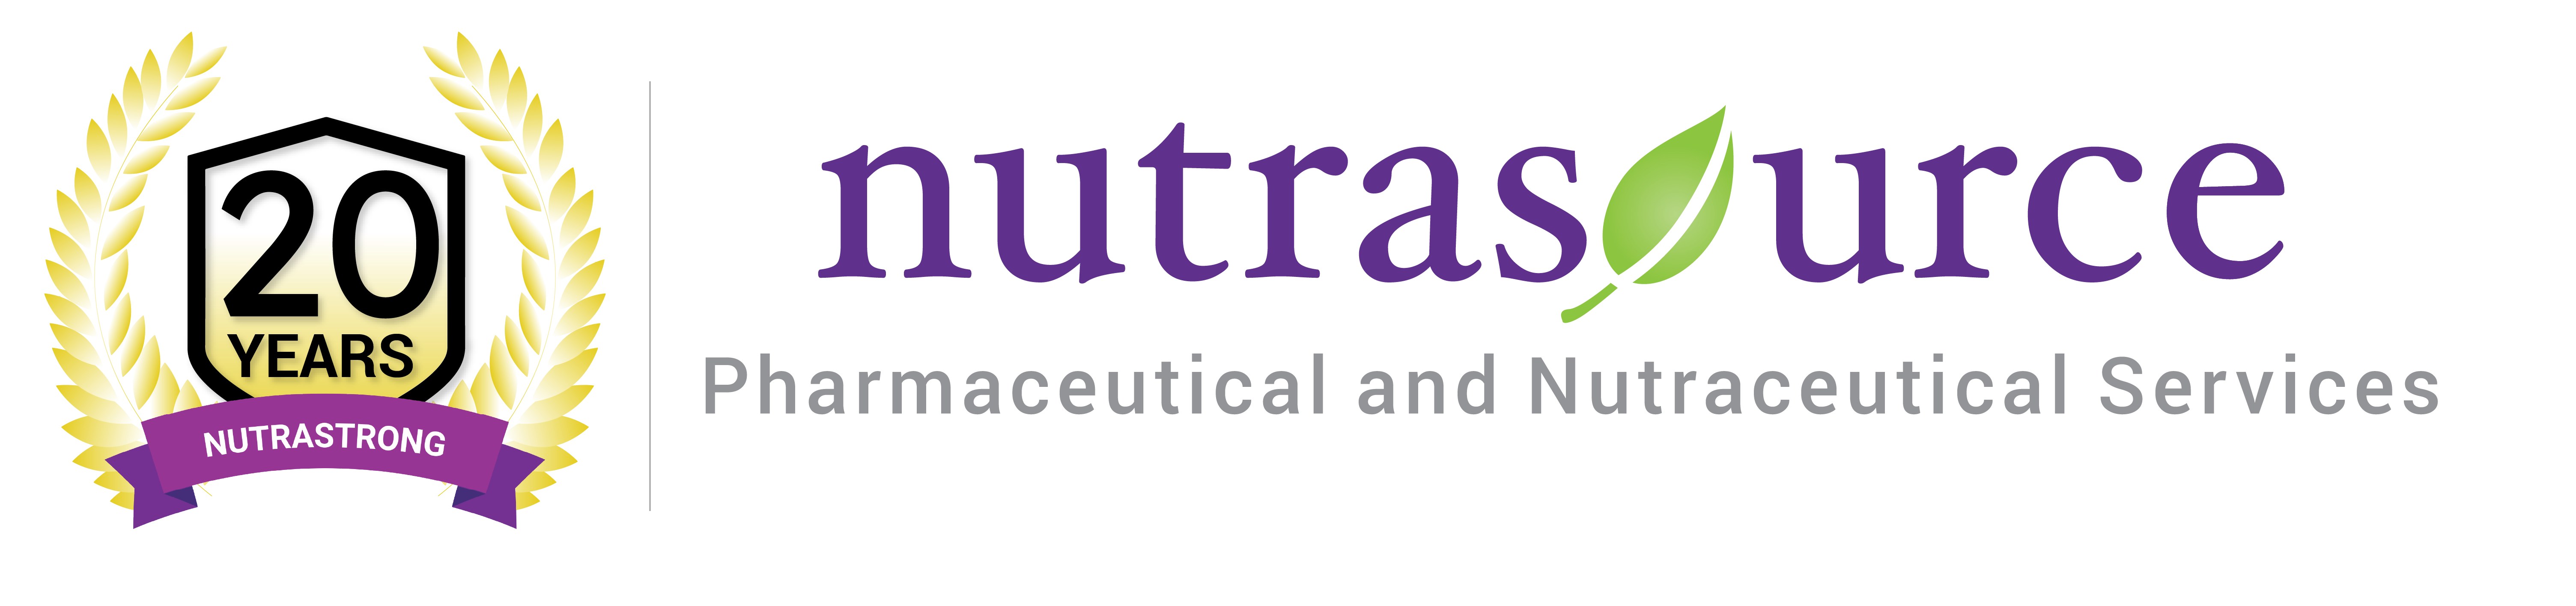 Nutrasource Pharmaceutical and Nutraceut